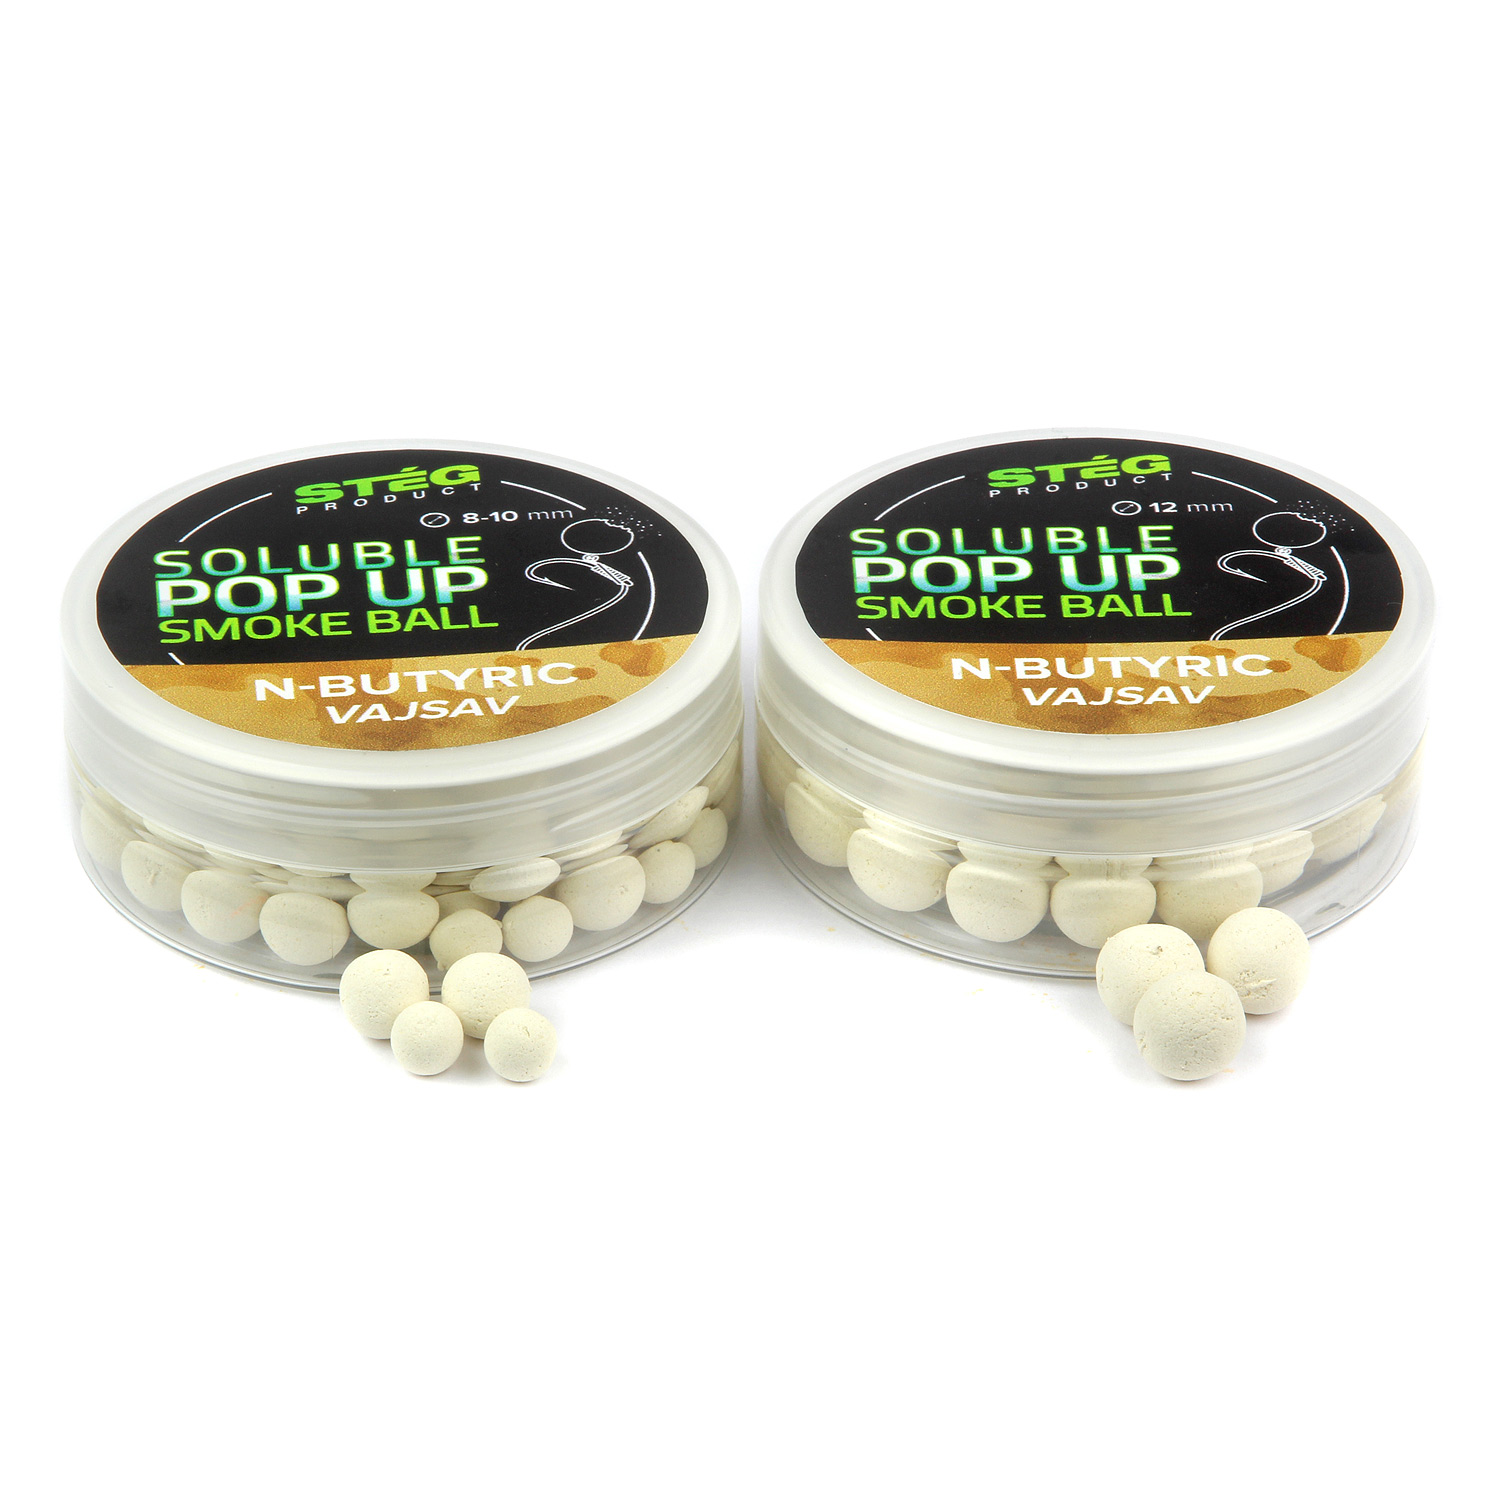 Stg Product Soluble Pop Up Smoke Ball 8-10mm N-Butyric 20g